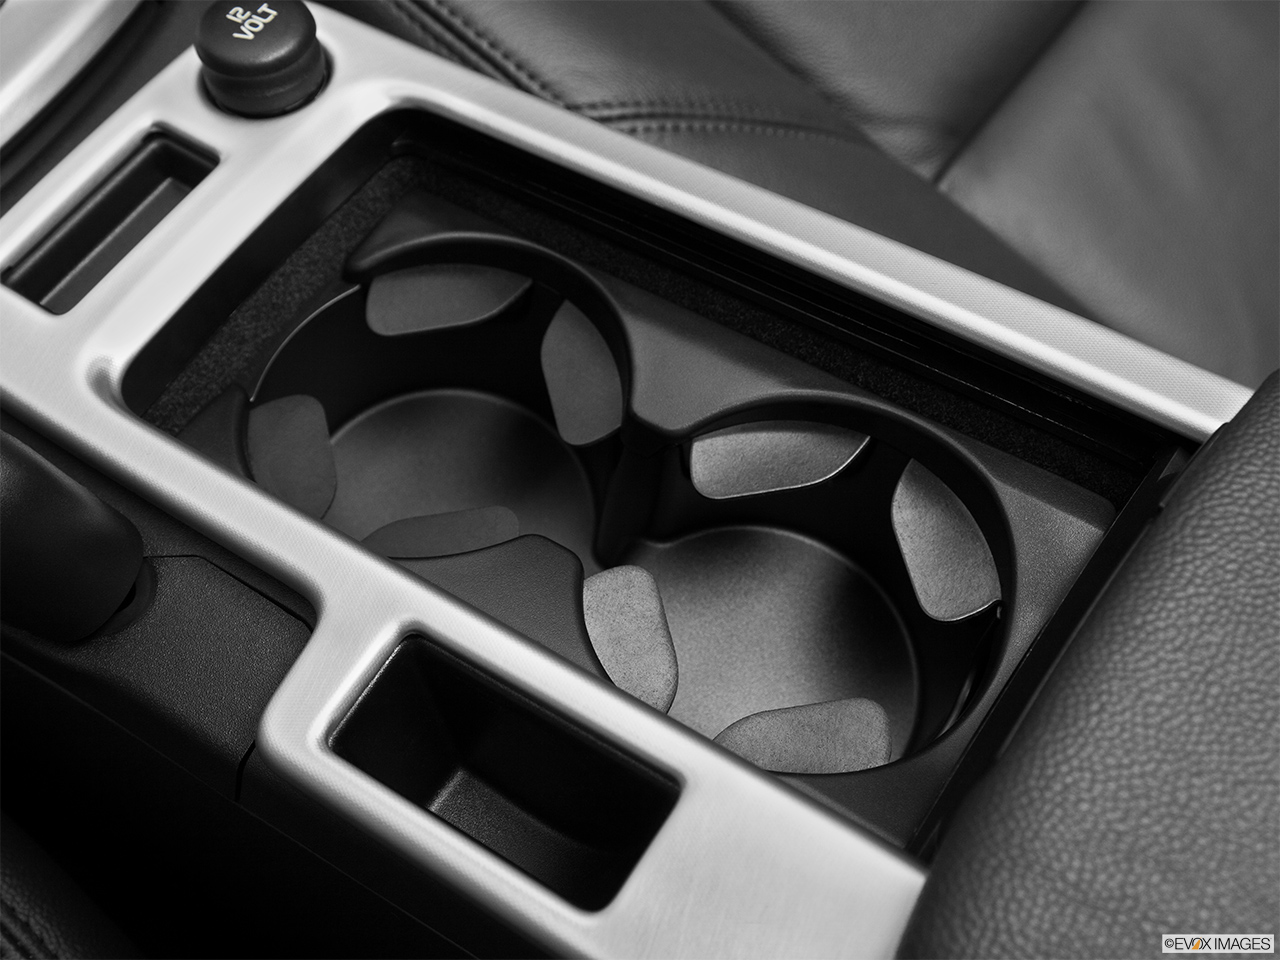 2011 Volvo V50 T5 Cup holders. 